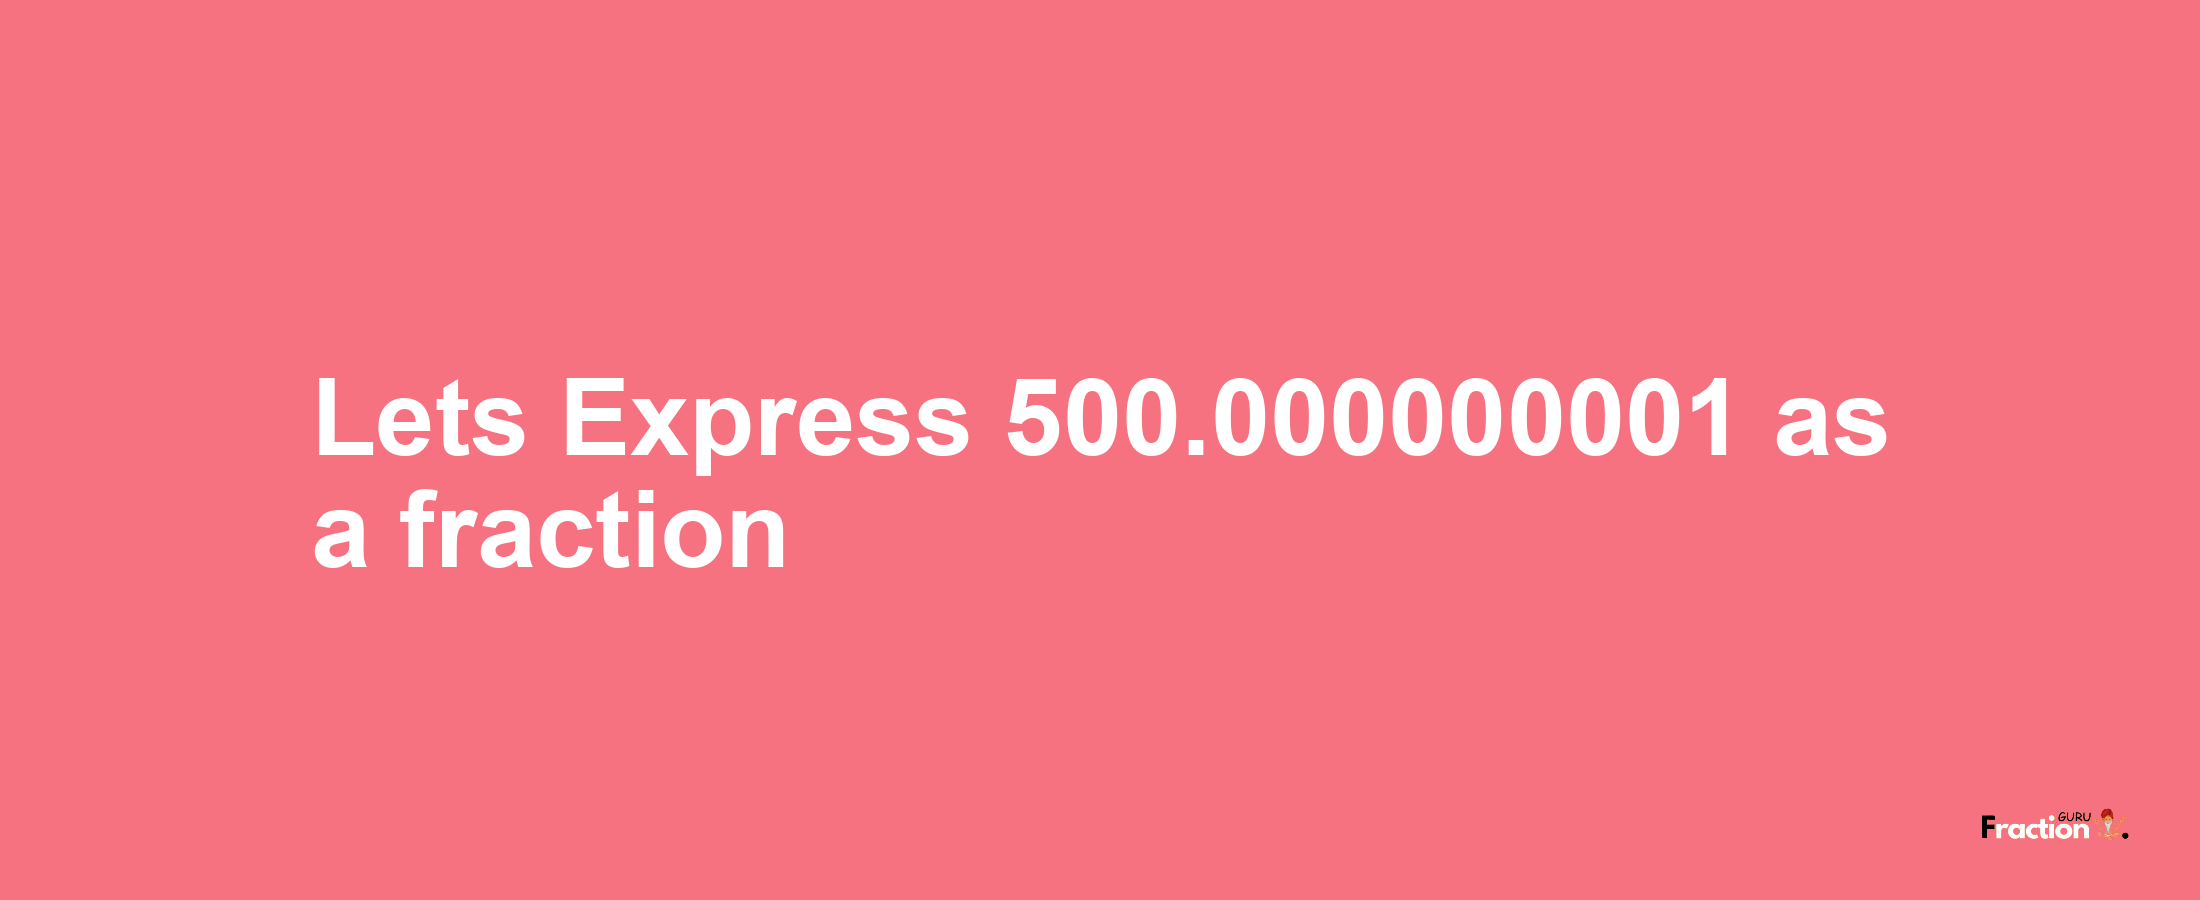 Lets Express 500.000000001 as afraction